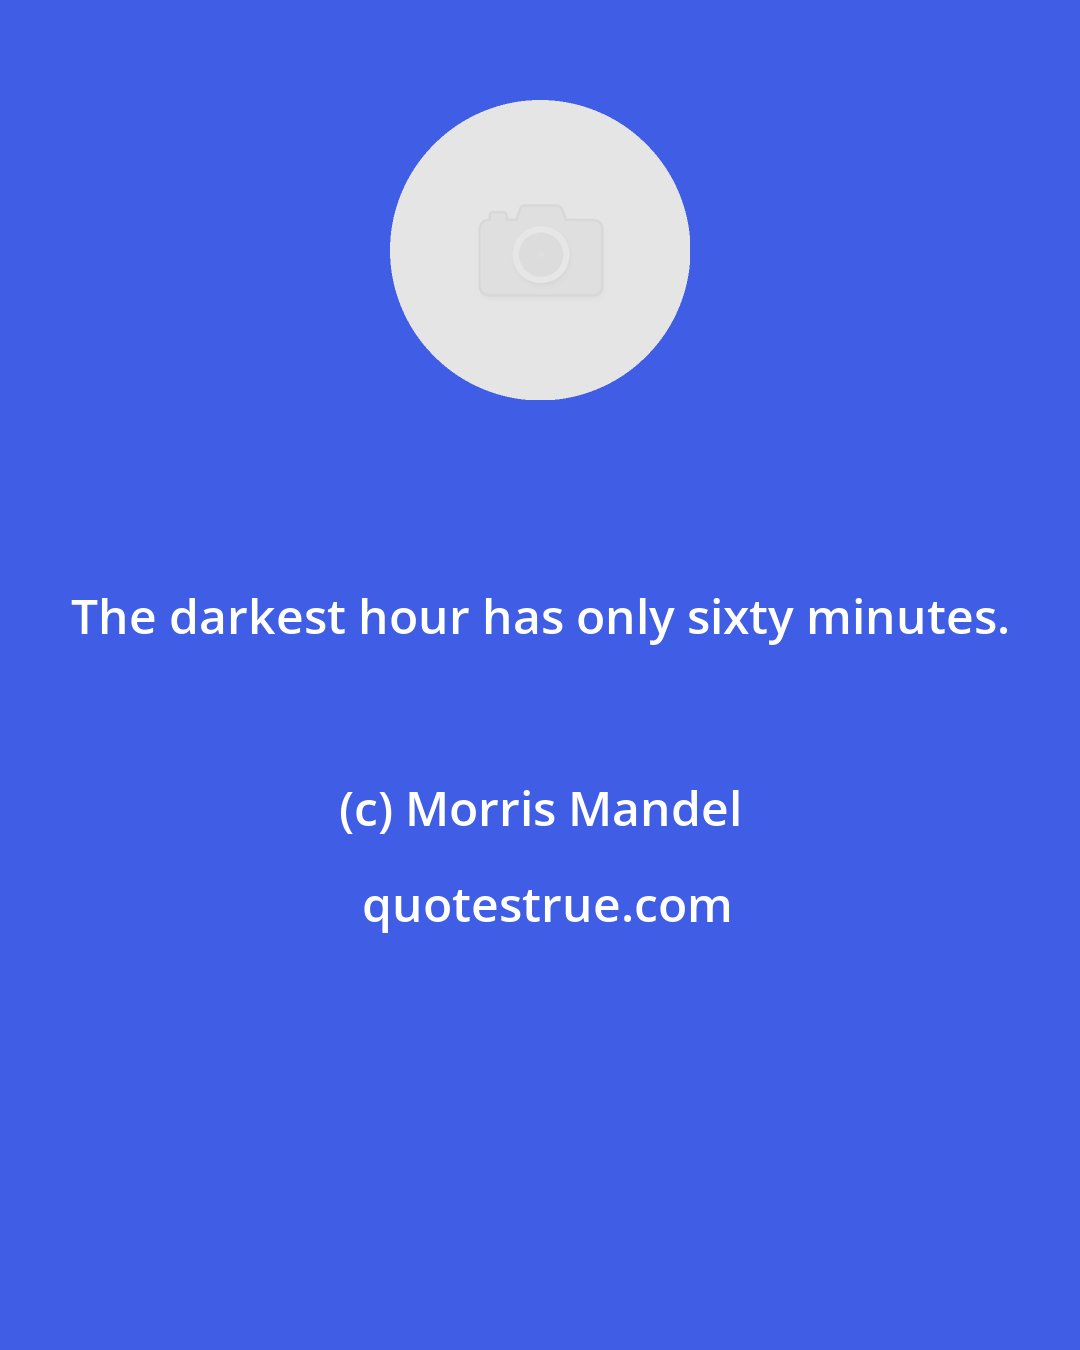 Morris Mandel: The darkest hour has only sixty minutes.